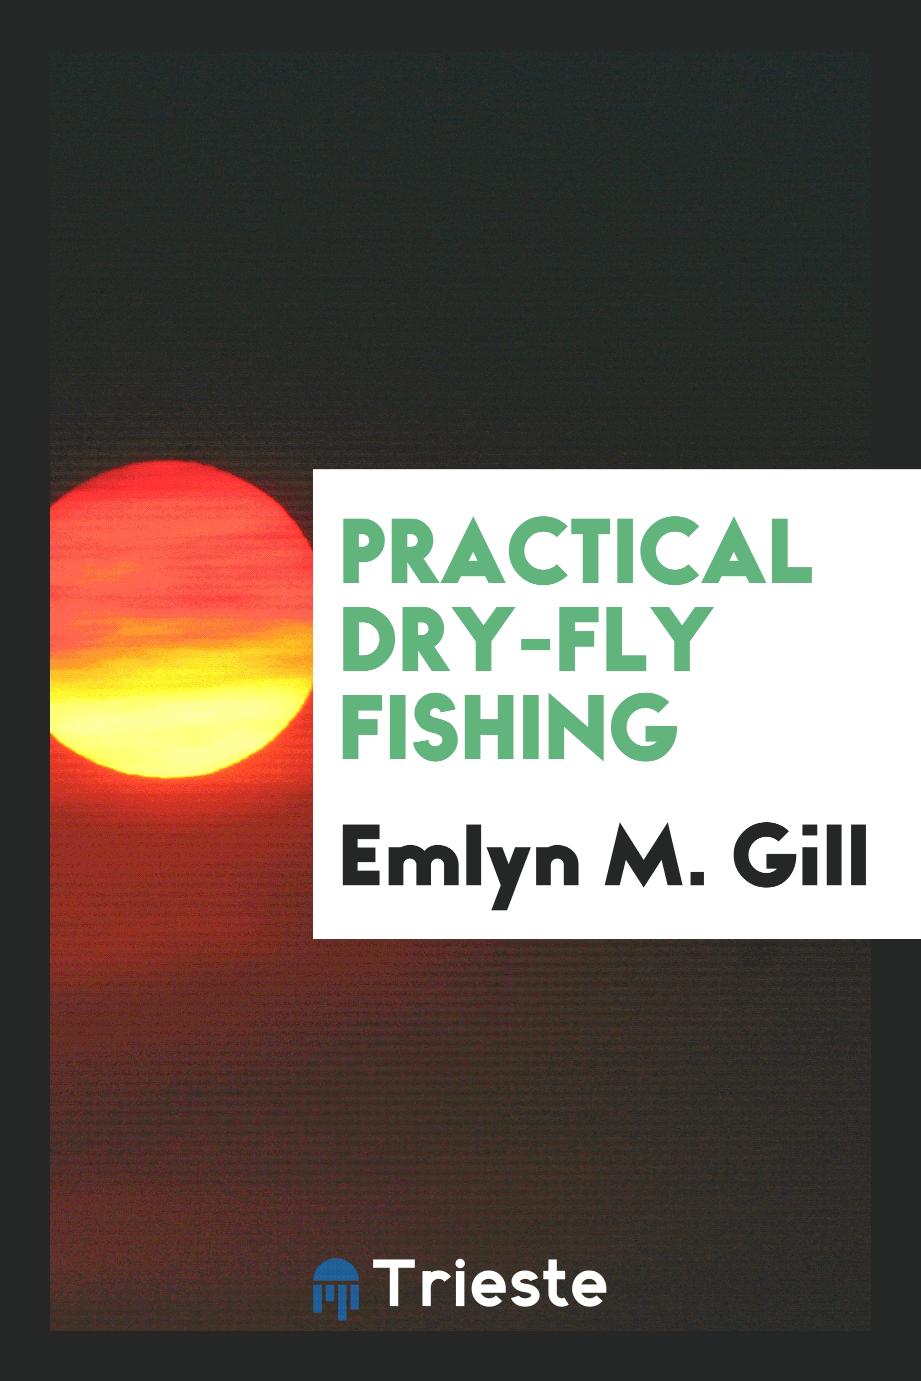 Practical dry-fly fishing